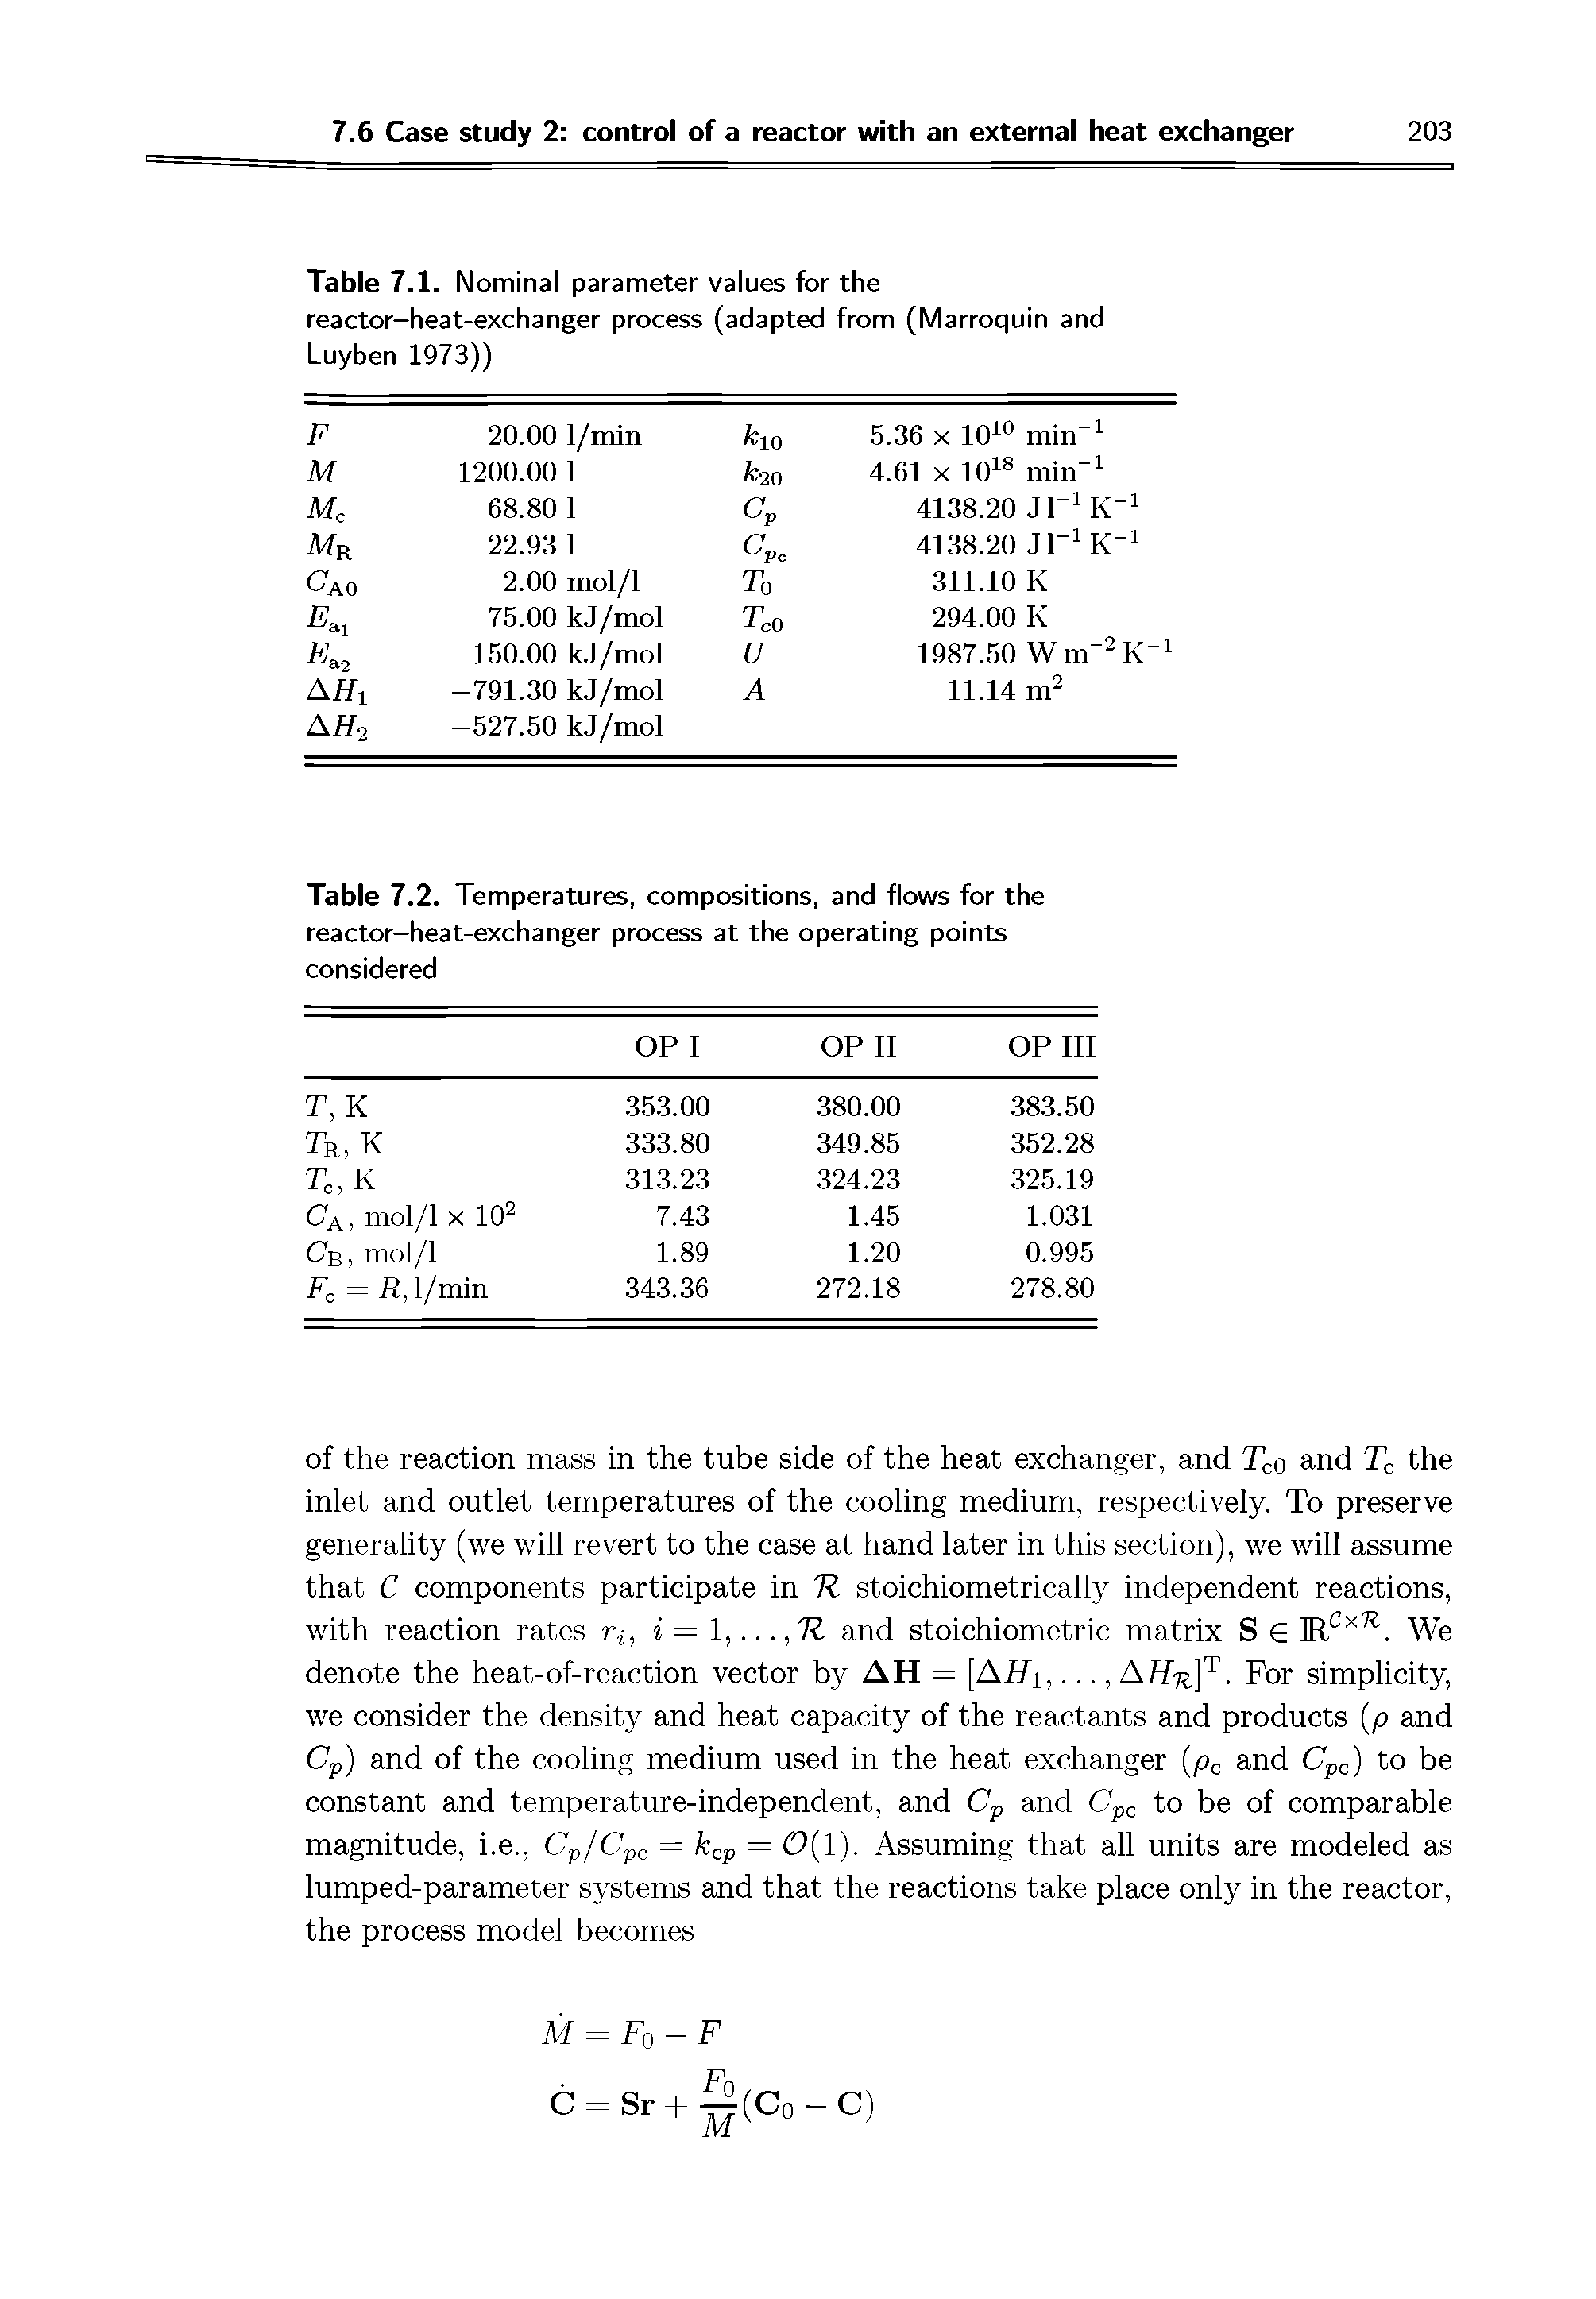 Table 7.1. Nominal parameter values for the reactor-heat-exchanger process (adapted from (Marroquin and Luyben 1973))...